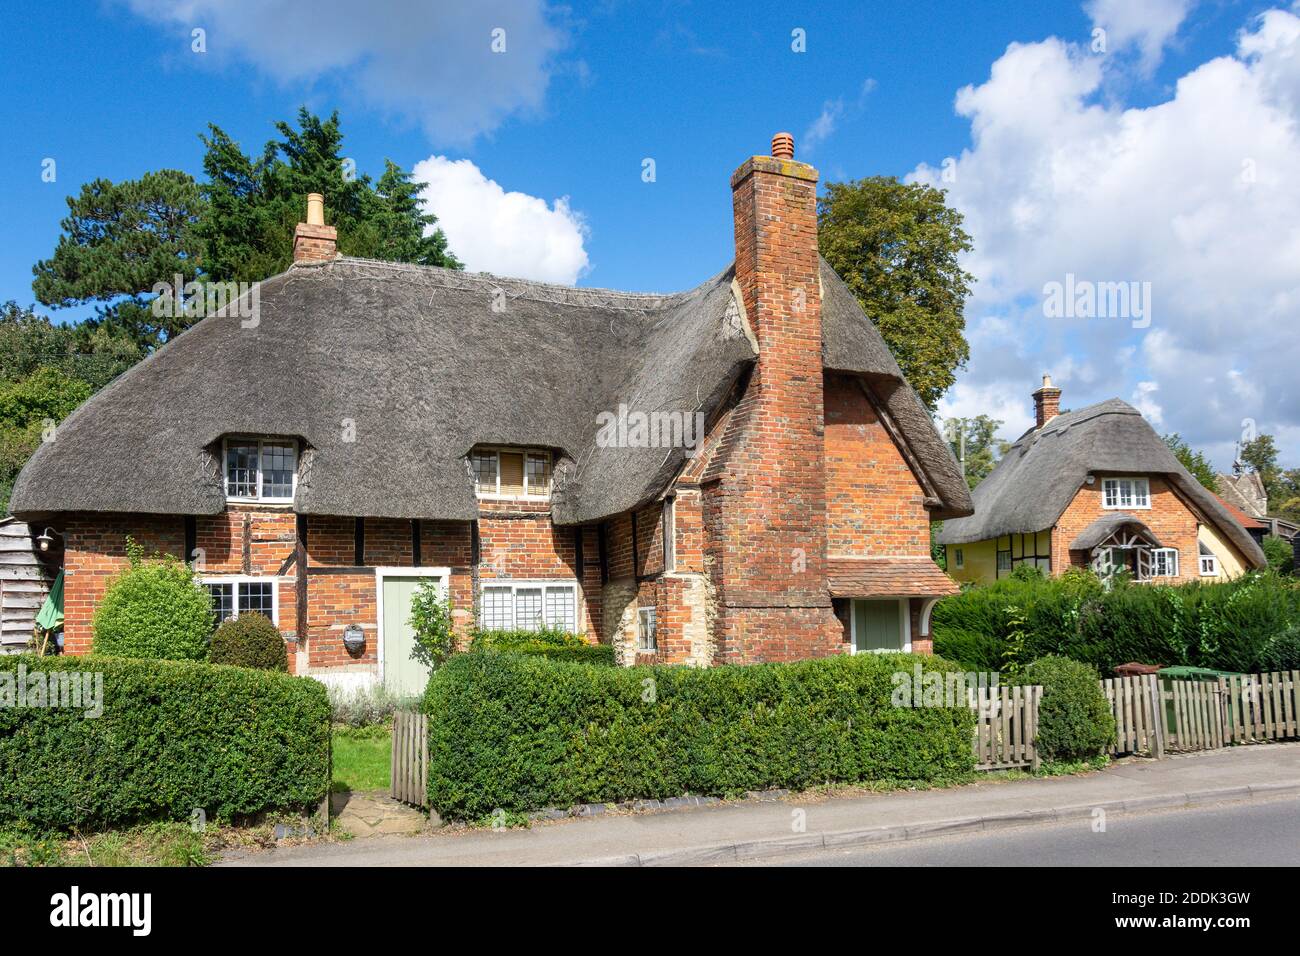 Thatched cottages, High Street, Clifton Hampden, Oxfordshire, England, United Kingdom Stock Photo